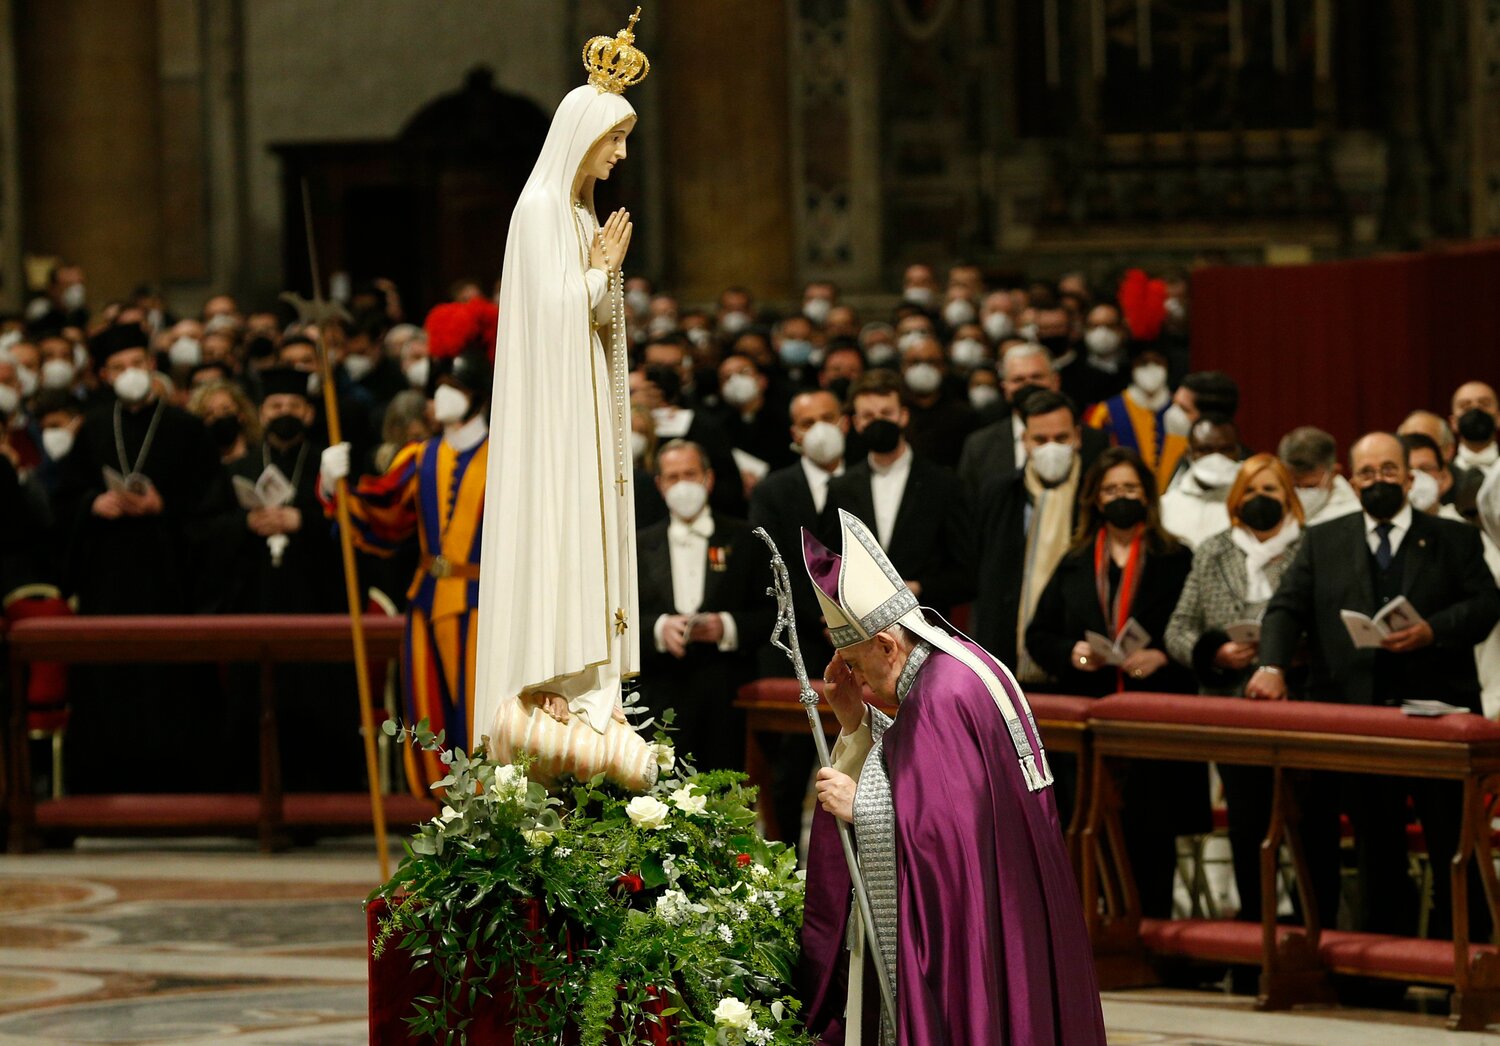 Pope Francis makes the sign of the cross in front of a Marian statue after consecrating the world and, in particular, Ukraine and Russia to the Immaculate Heart of Mary during a Lenten penance service in St. Peter's Basilica at the Vatican March 25, 2022.